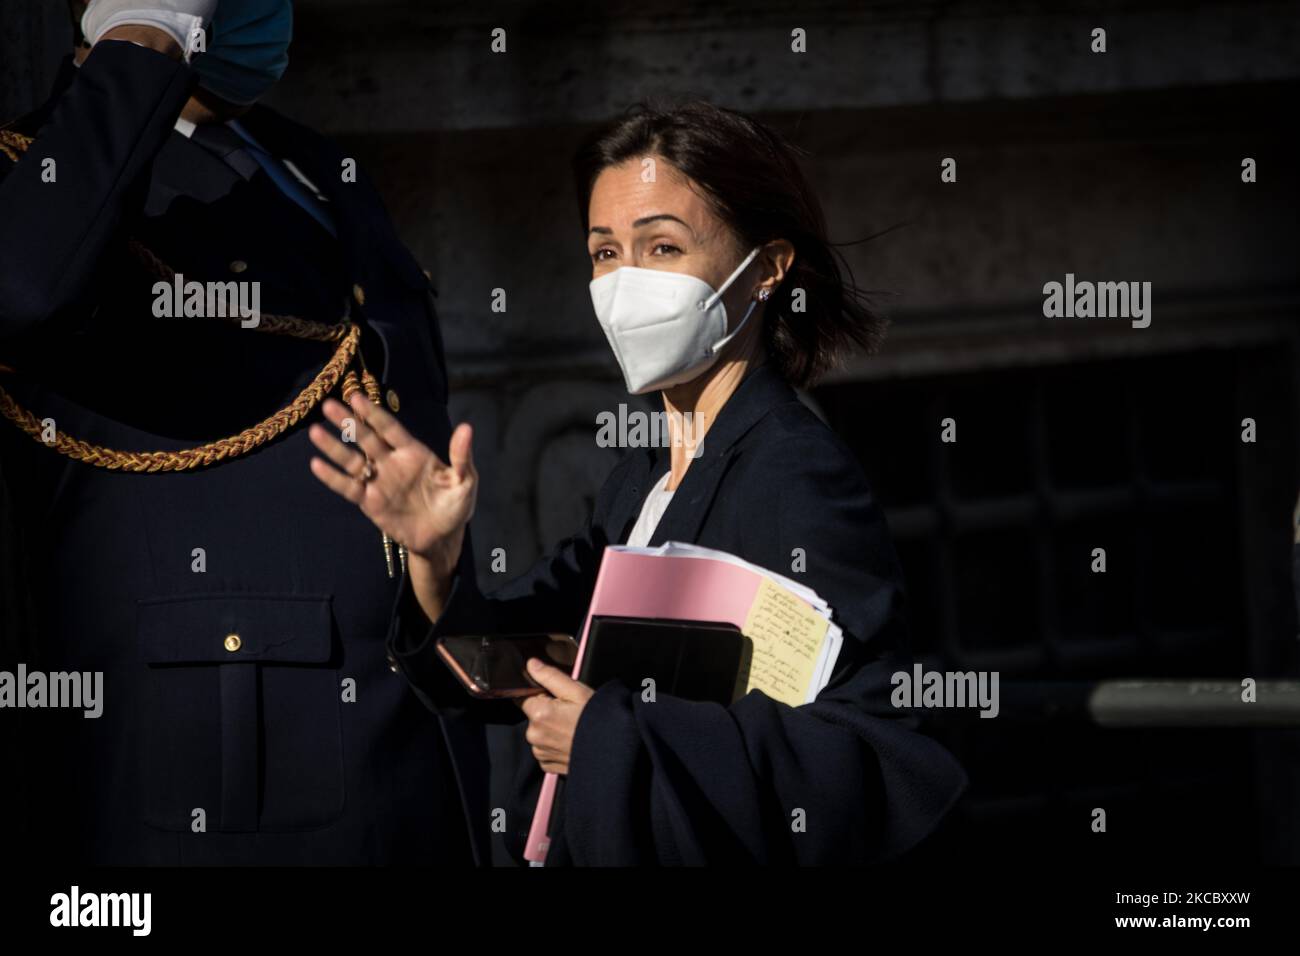 Palazzo Chigi, arrives at the Council of Ministers, Minister Mara Carfagna for the South and Territorial Cohesion in the Draghi government: on March 31, 2021 in Rome, Italy. (Photo by Andrea Ronchini/NurPhoto) Stock Photo